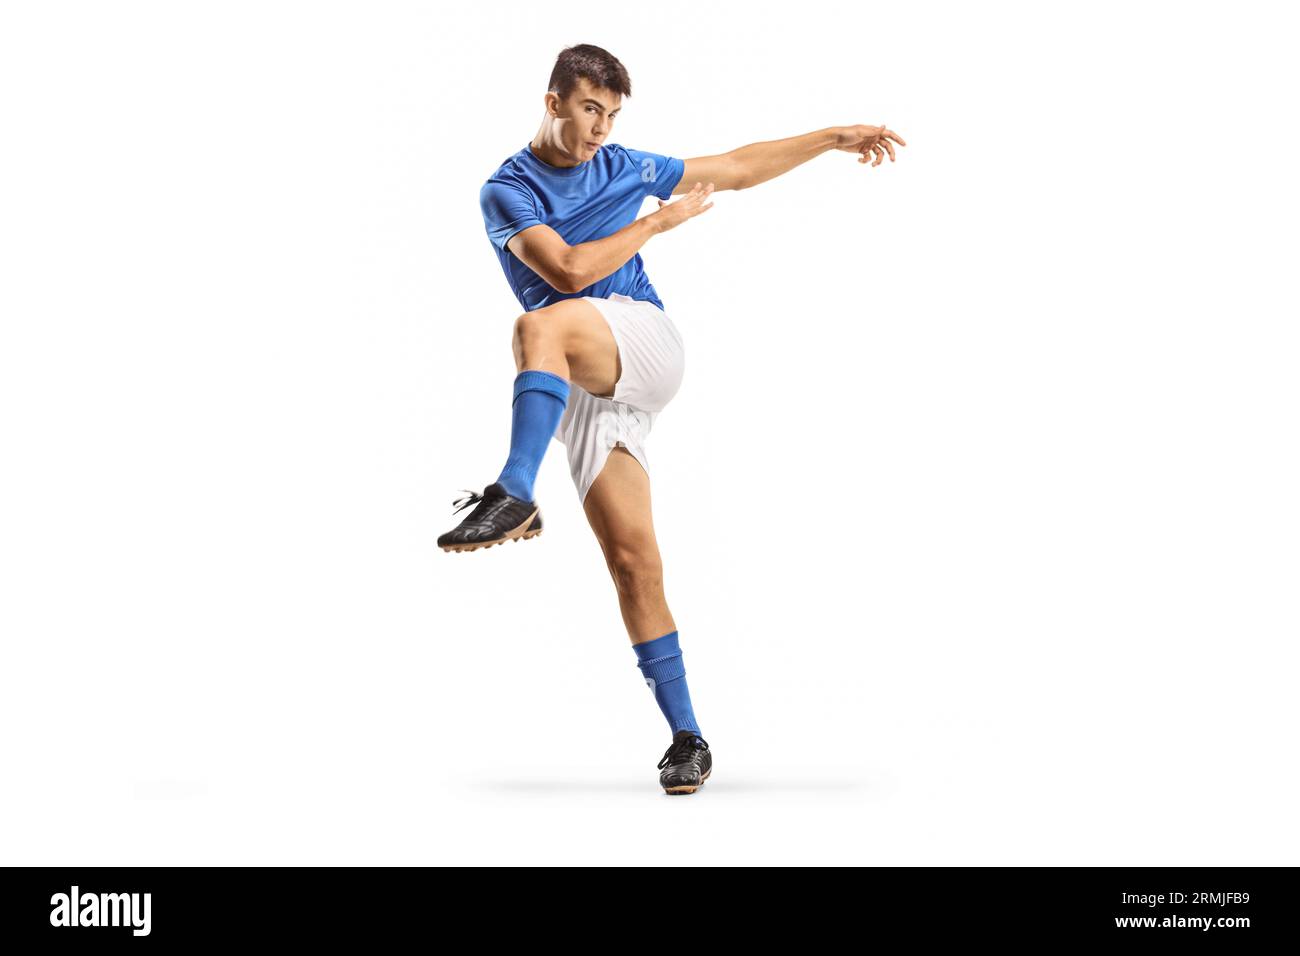 Football Pose Vector Hd Images, Silhouettes Of Football Players In Various  Poses, Athlete, Silhouettes, Shot PNG Image For Free Download